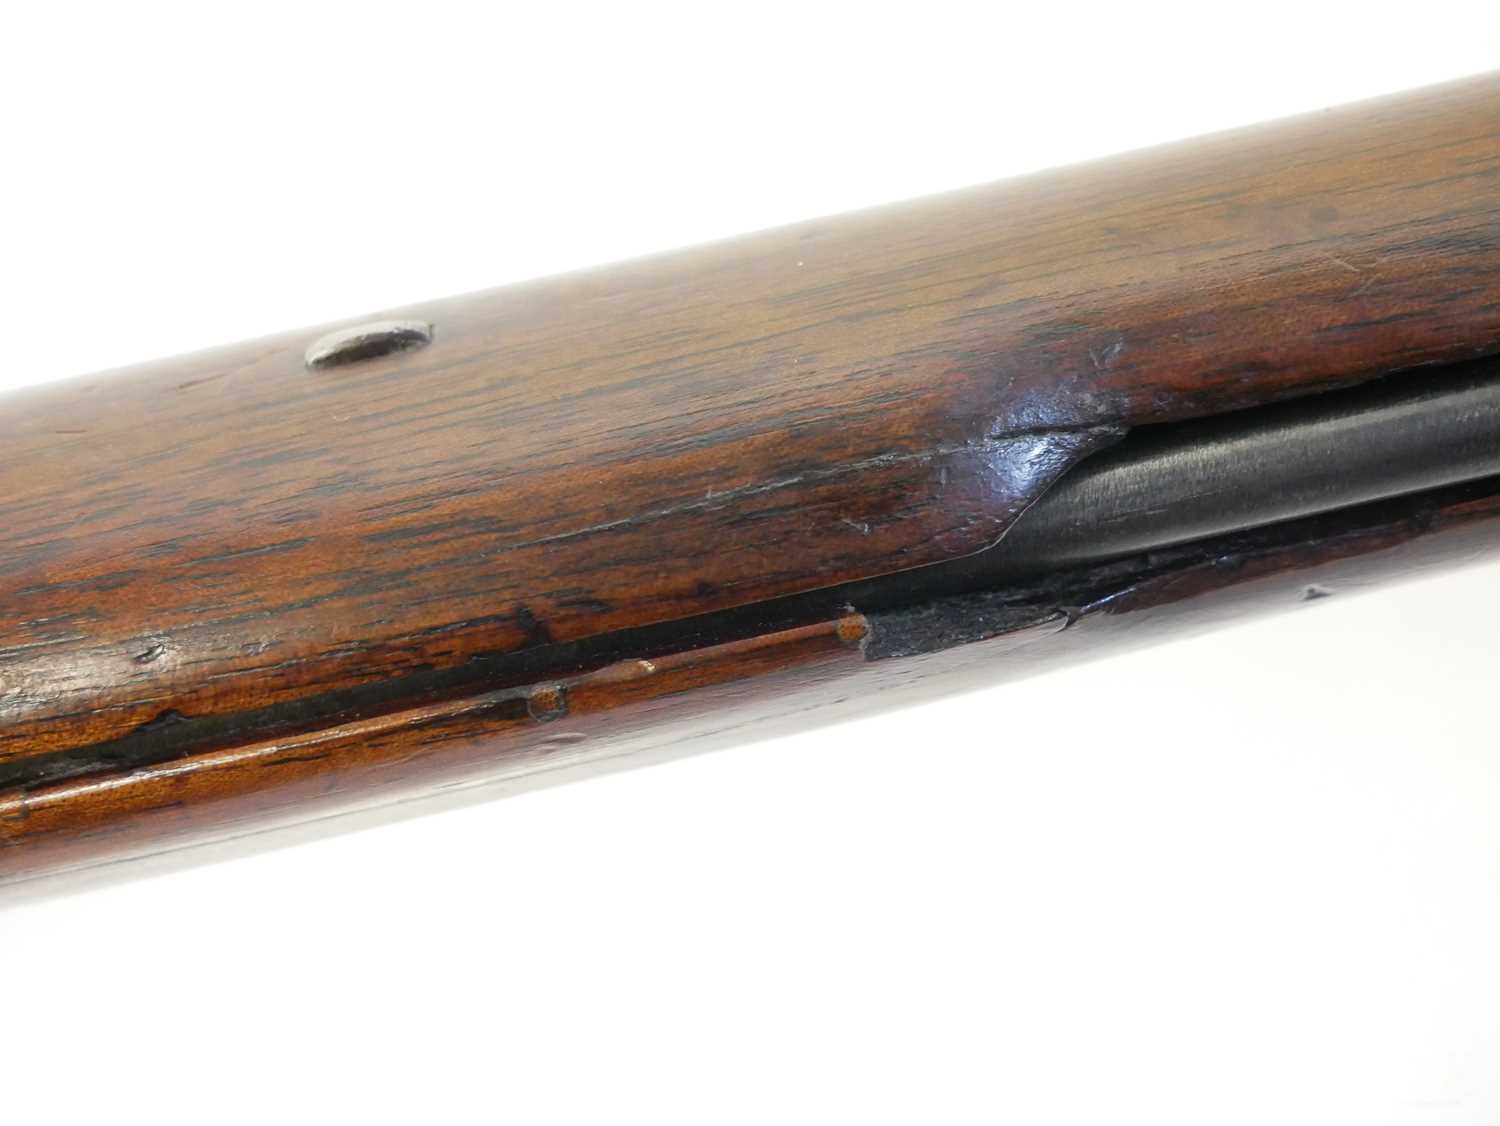 Flintlock .625 Baker rifle by E. Baker and Sons, 40 inch browned barrel with seven groove rifling, - Image 14 of 22